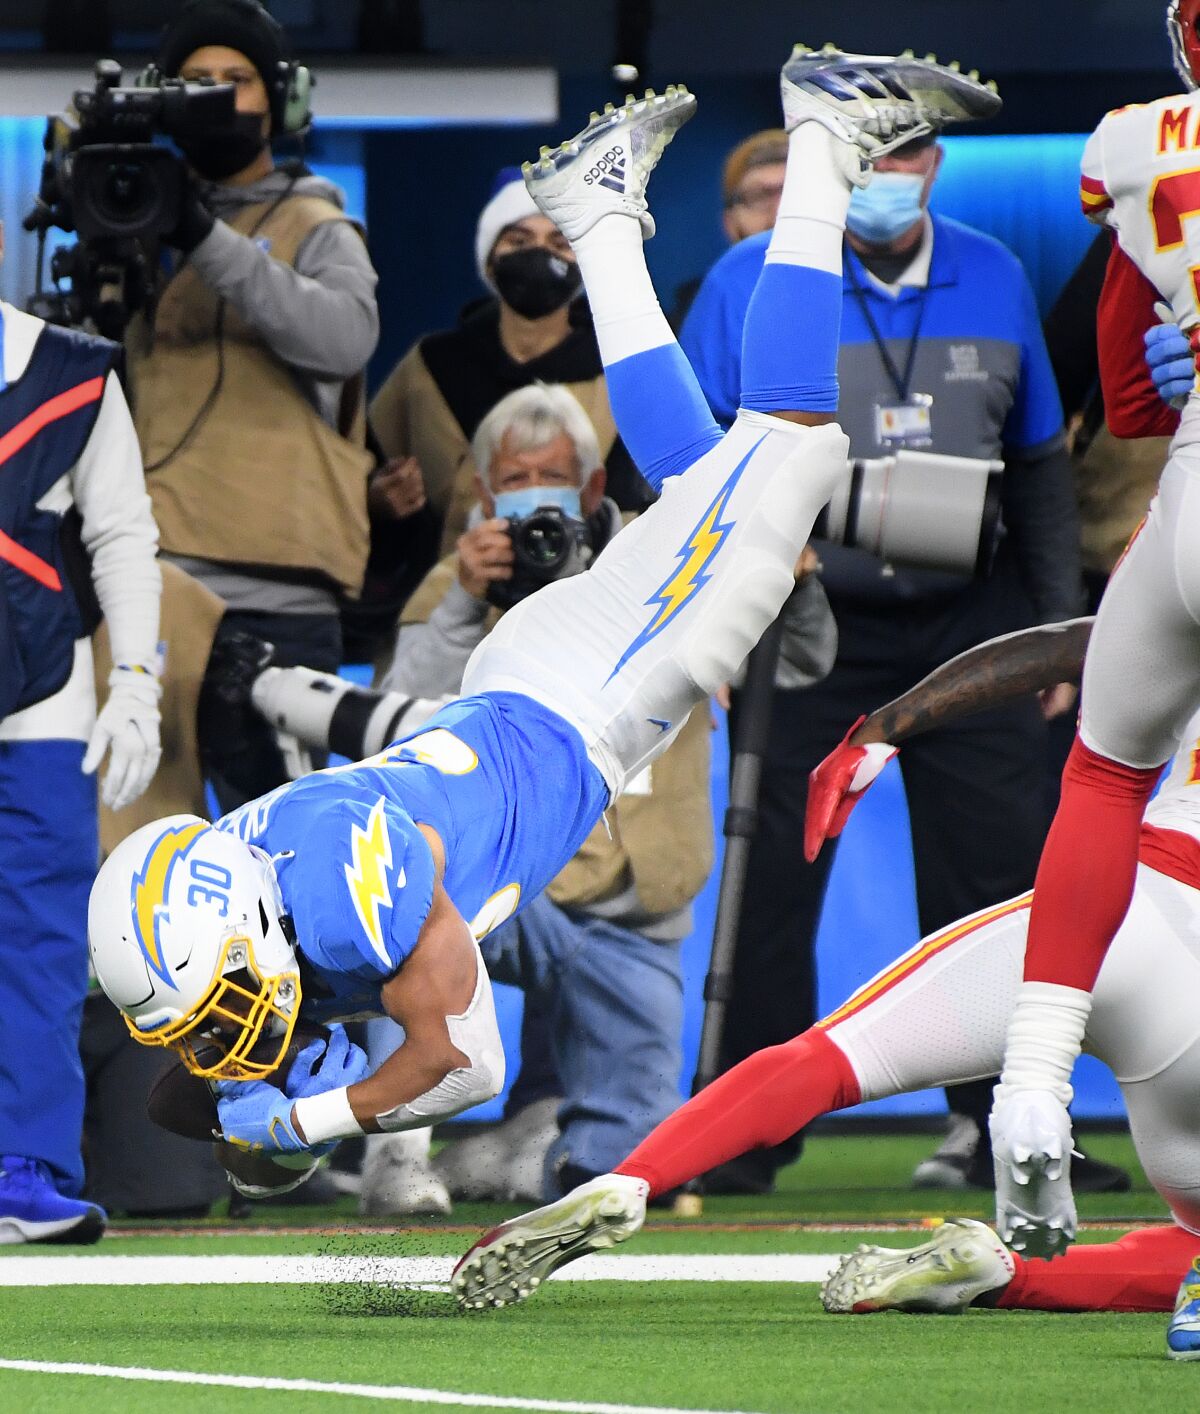 Chargers running back Austin Ekeler is upended during a carry in the second quarter.